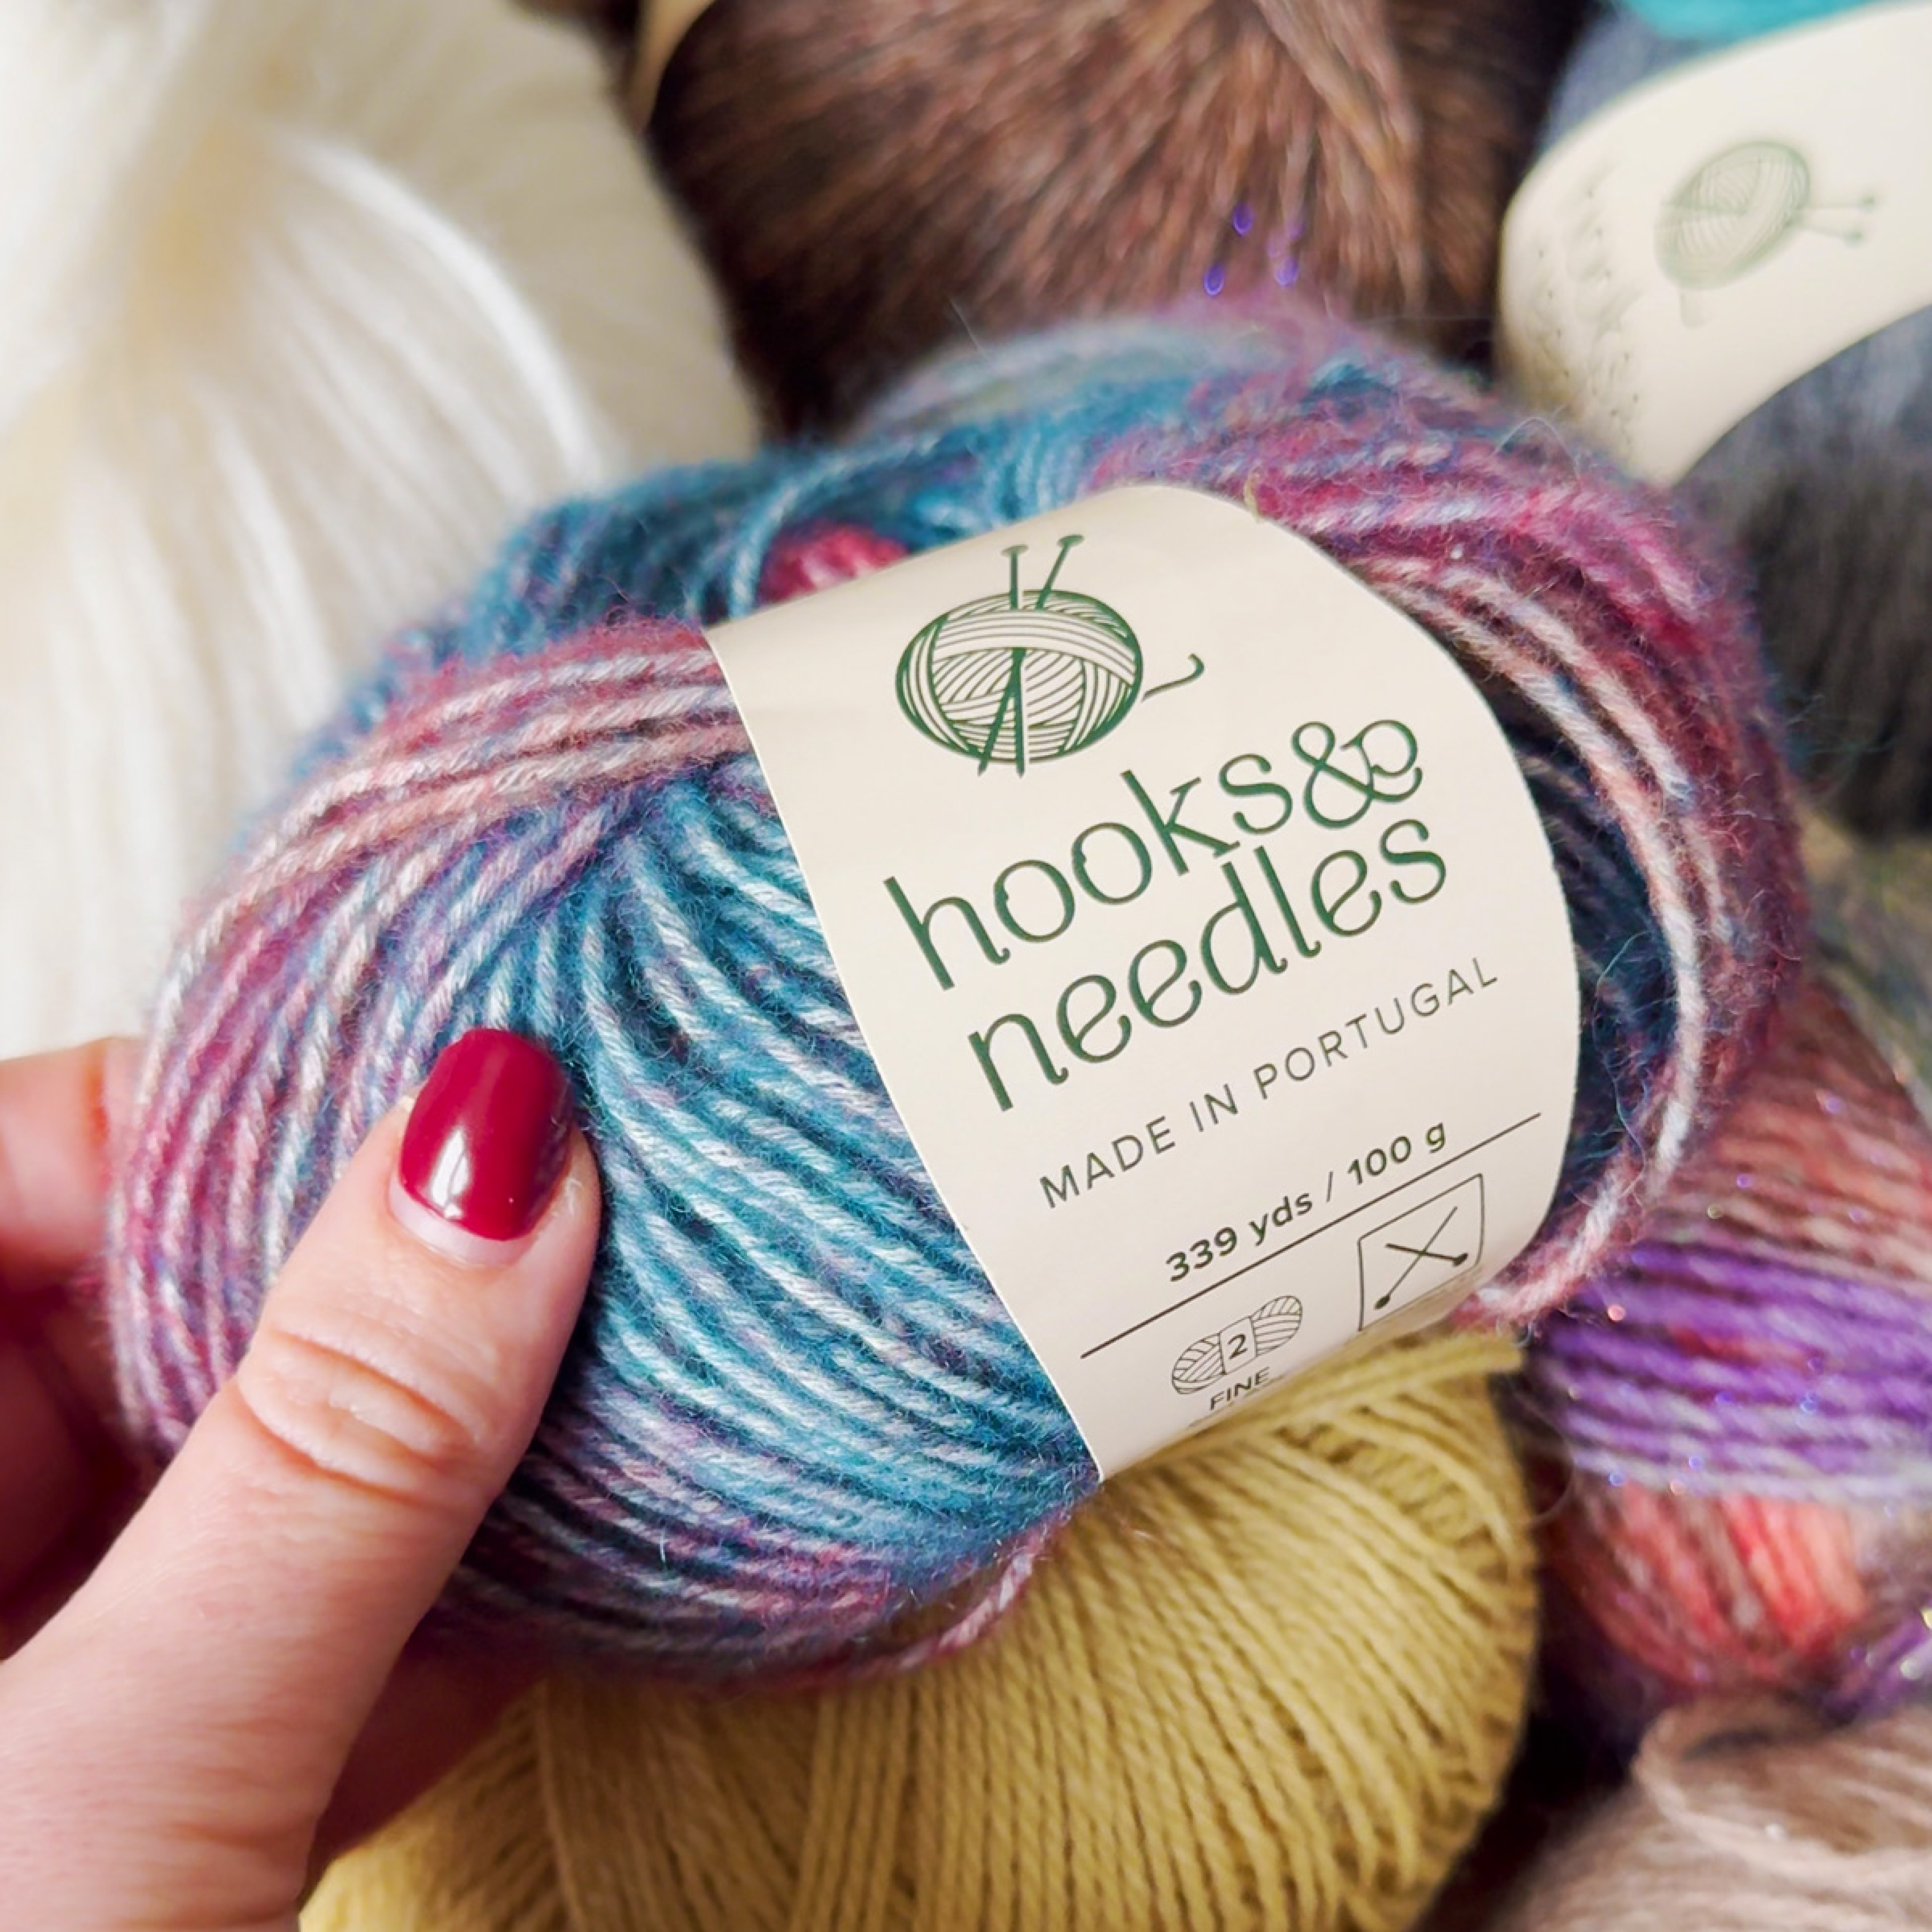 Hand holding a skein of multicolored yarn labeled "Hooks & Needles Subscription Box #10, made in Portugal" with other yarn skeins in the background.